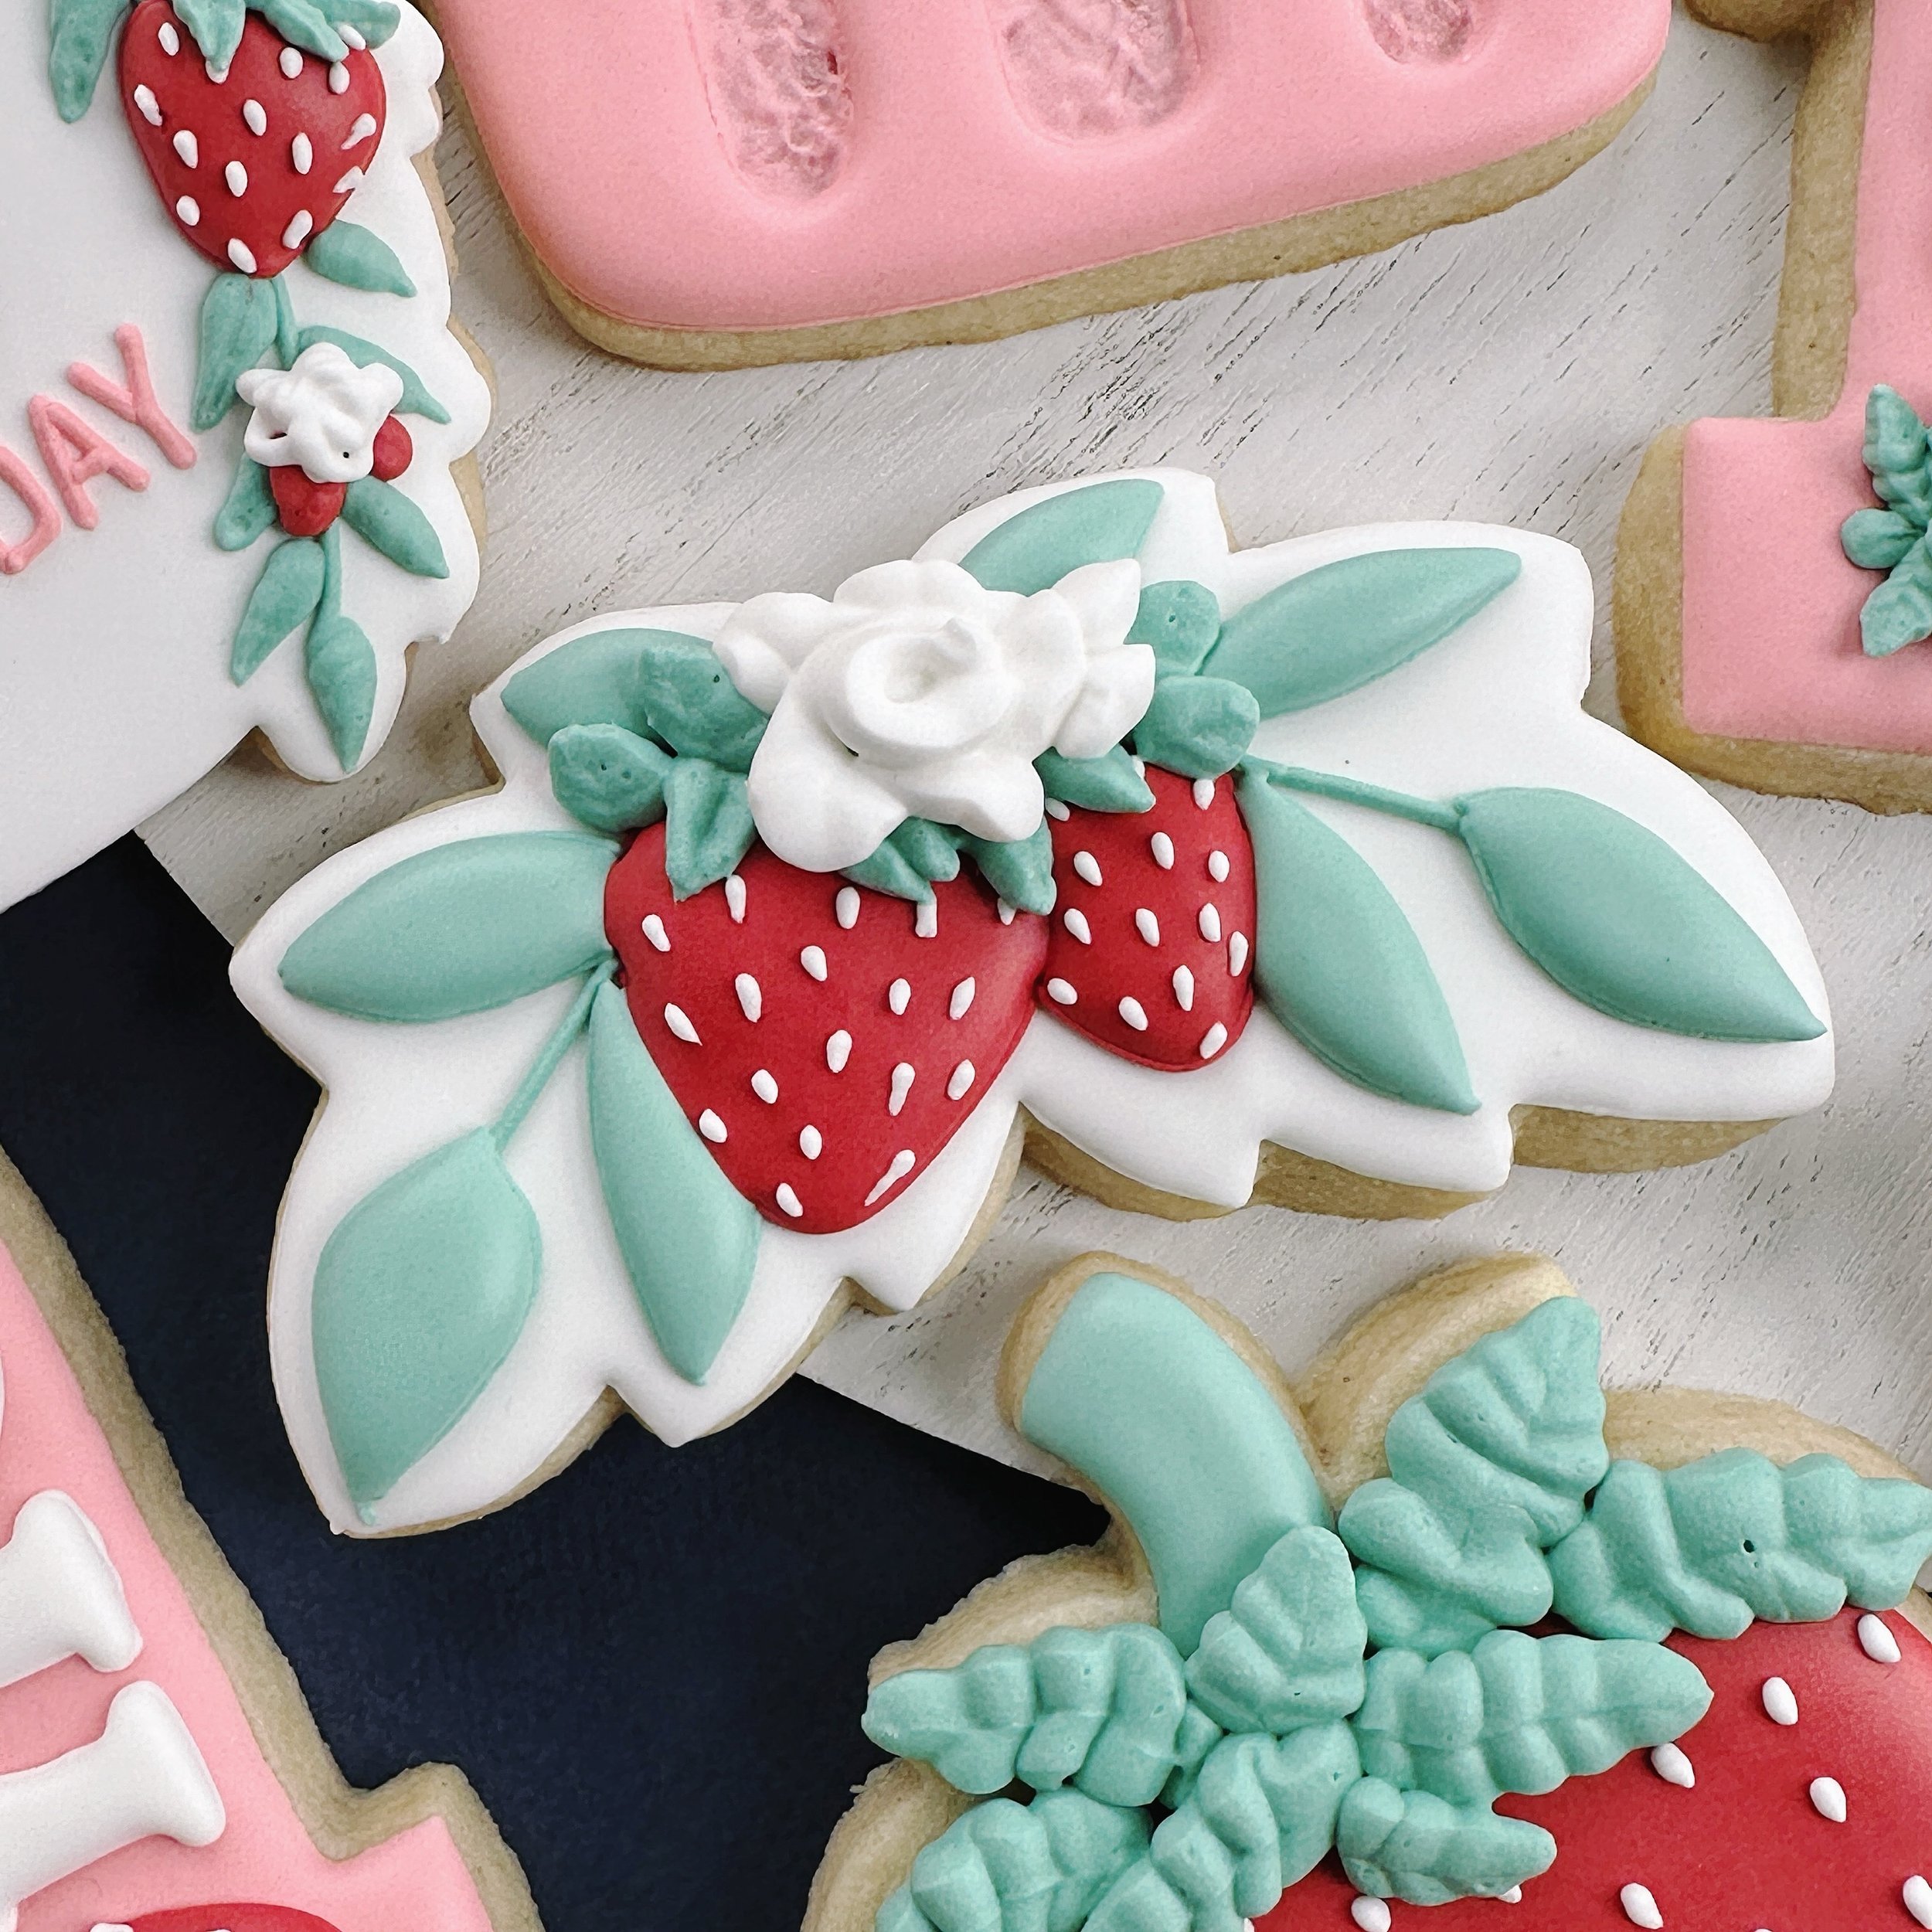 I&rsquo;ll never tire of fruit and leaves on this shape 🍓❤️

#strawberrycookies #atlantacookies #customcookiesatlanta #atlantacookier #atlantacustomcookies #atlcookies  #cookiesatl #customcookies #decoratedcookies #customsugarcookies #royalicingcook